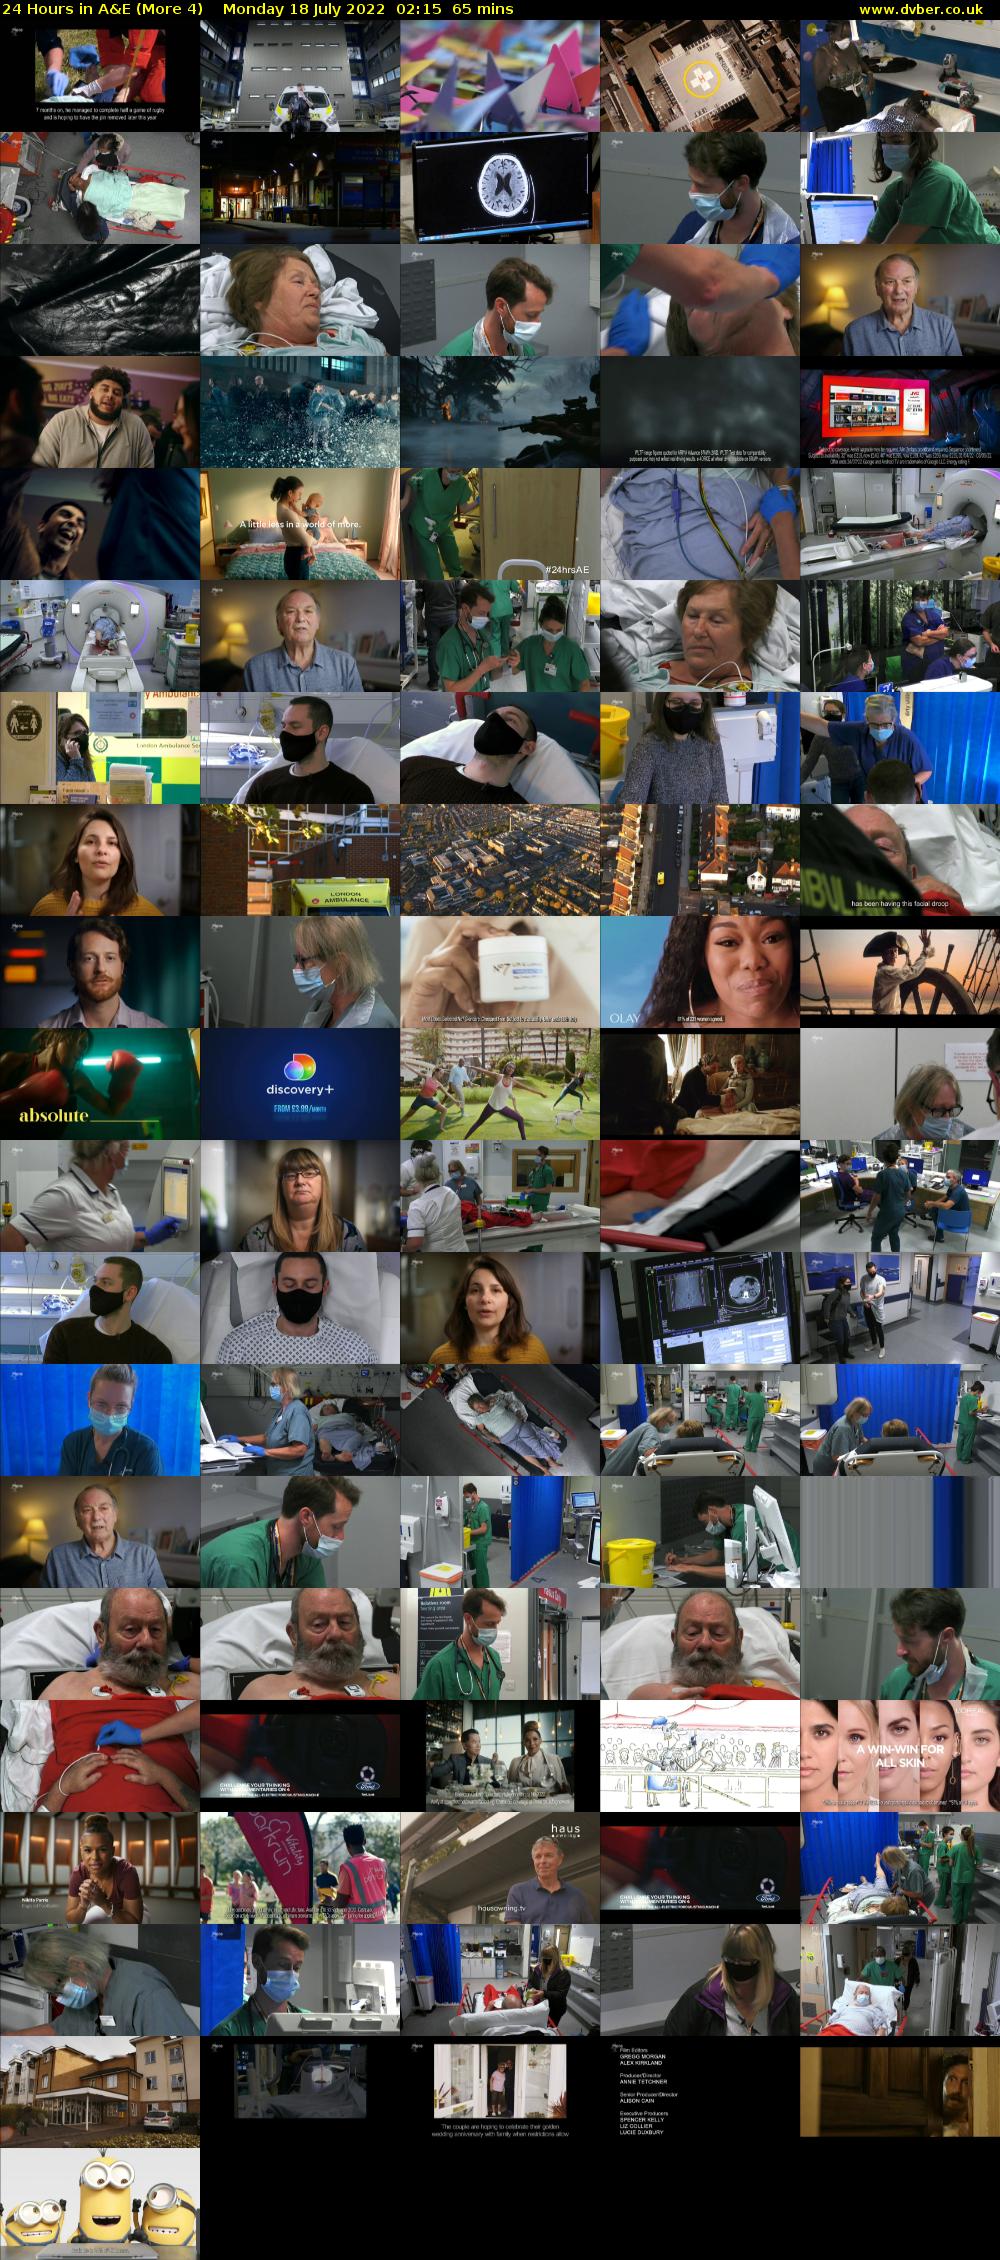 24 Hours in A&E (More 4) Monday 18 July 2022 02:15 - 03:20